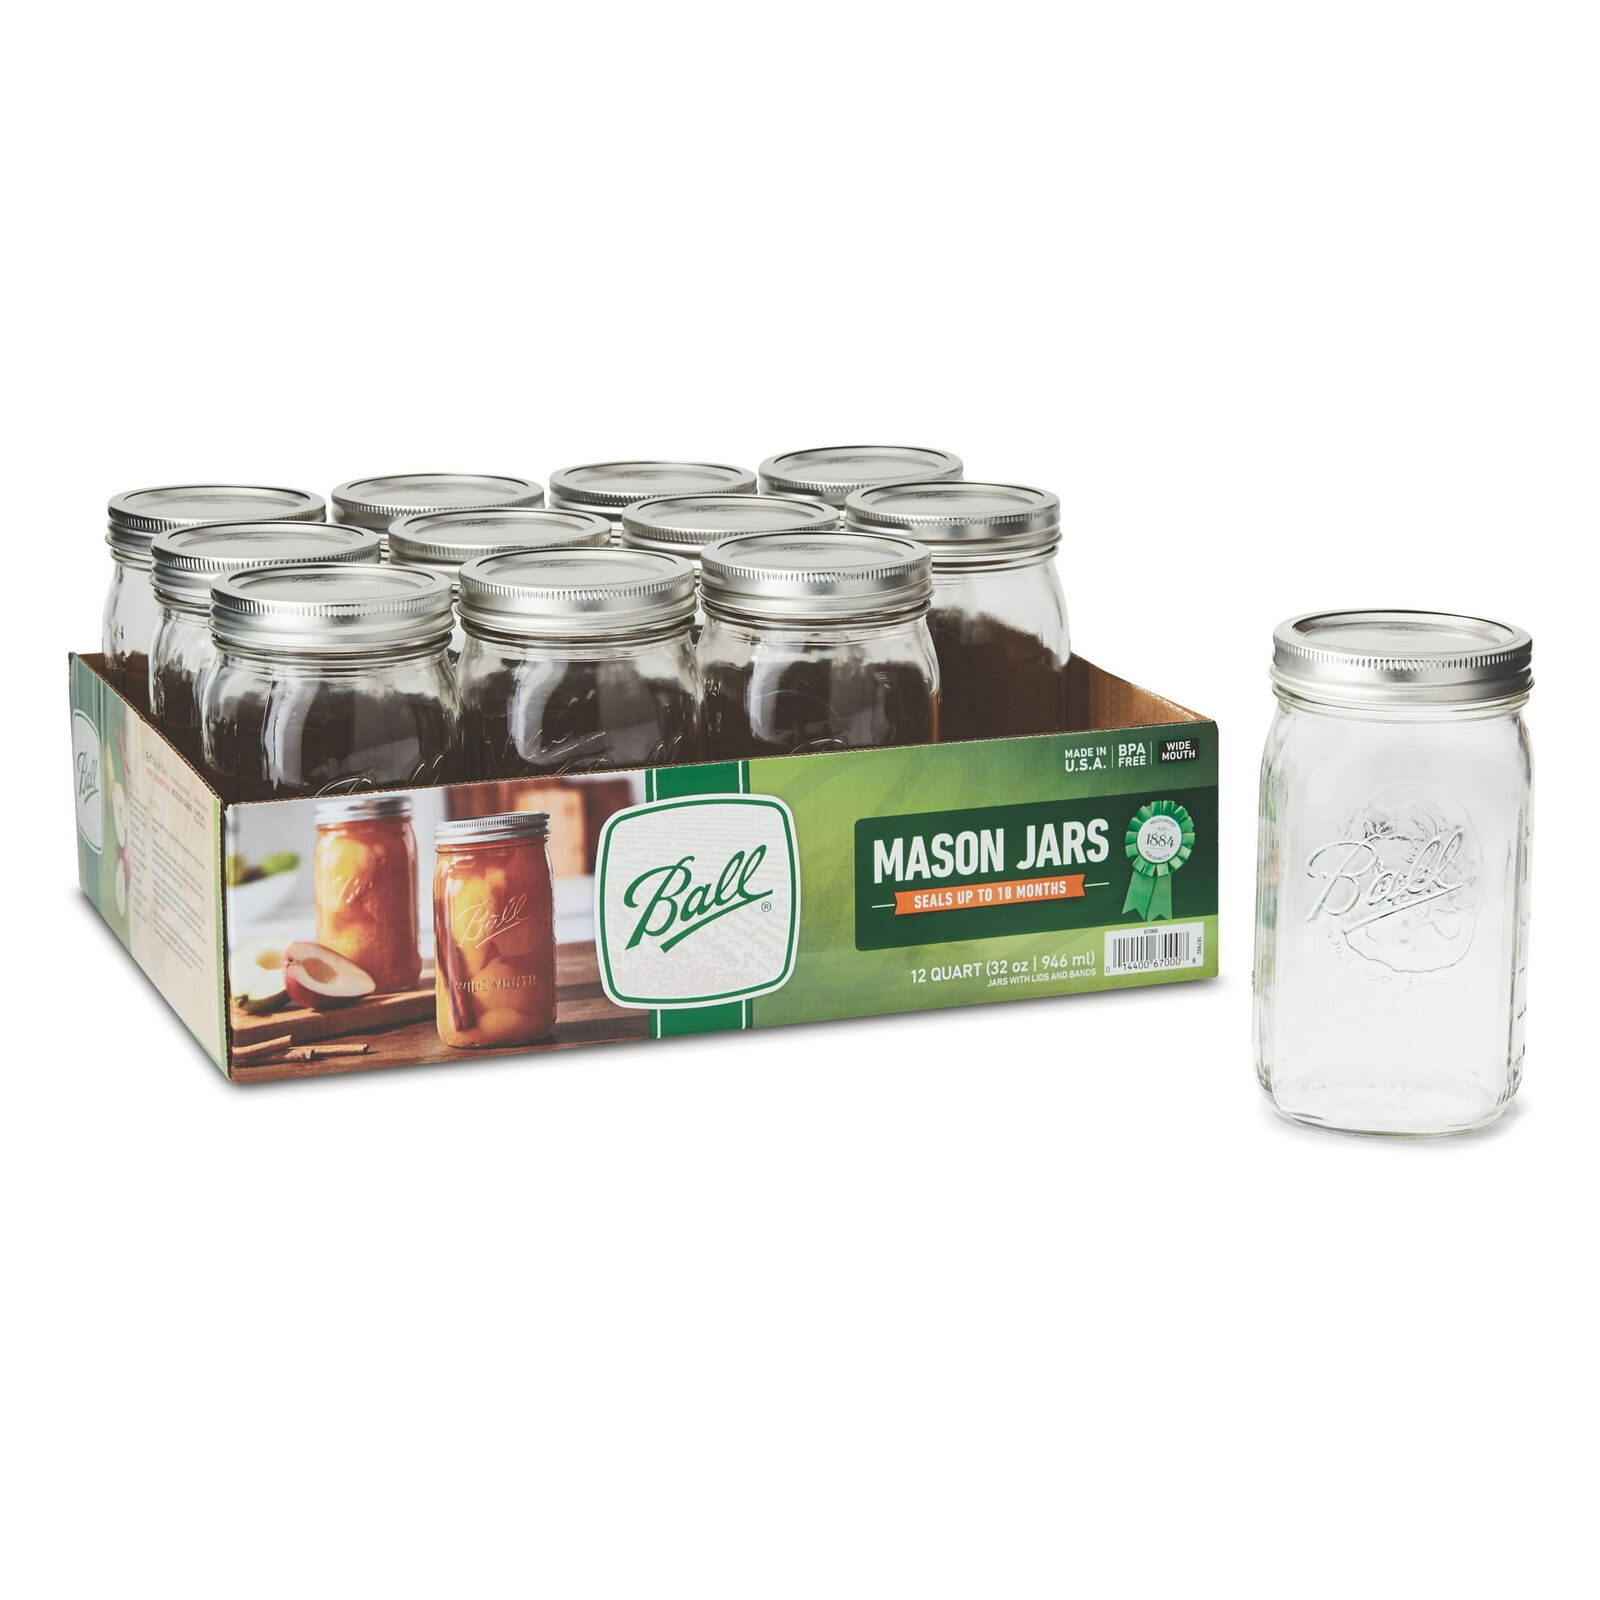 Wide Mouth 32oz Mason Jars with Lids & Bands, 12 Count